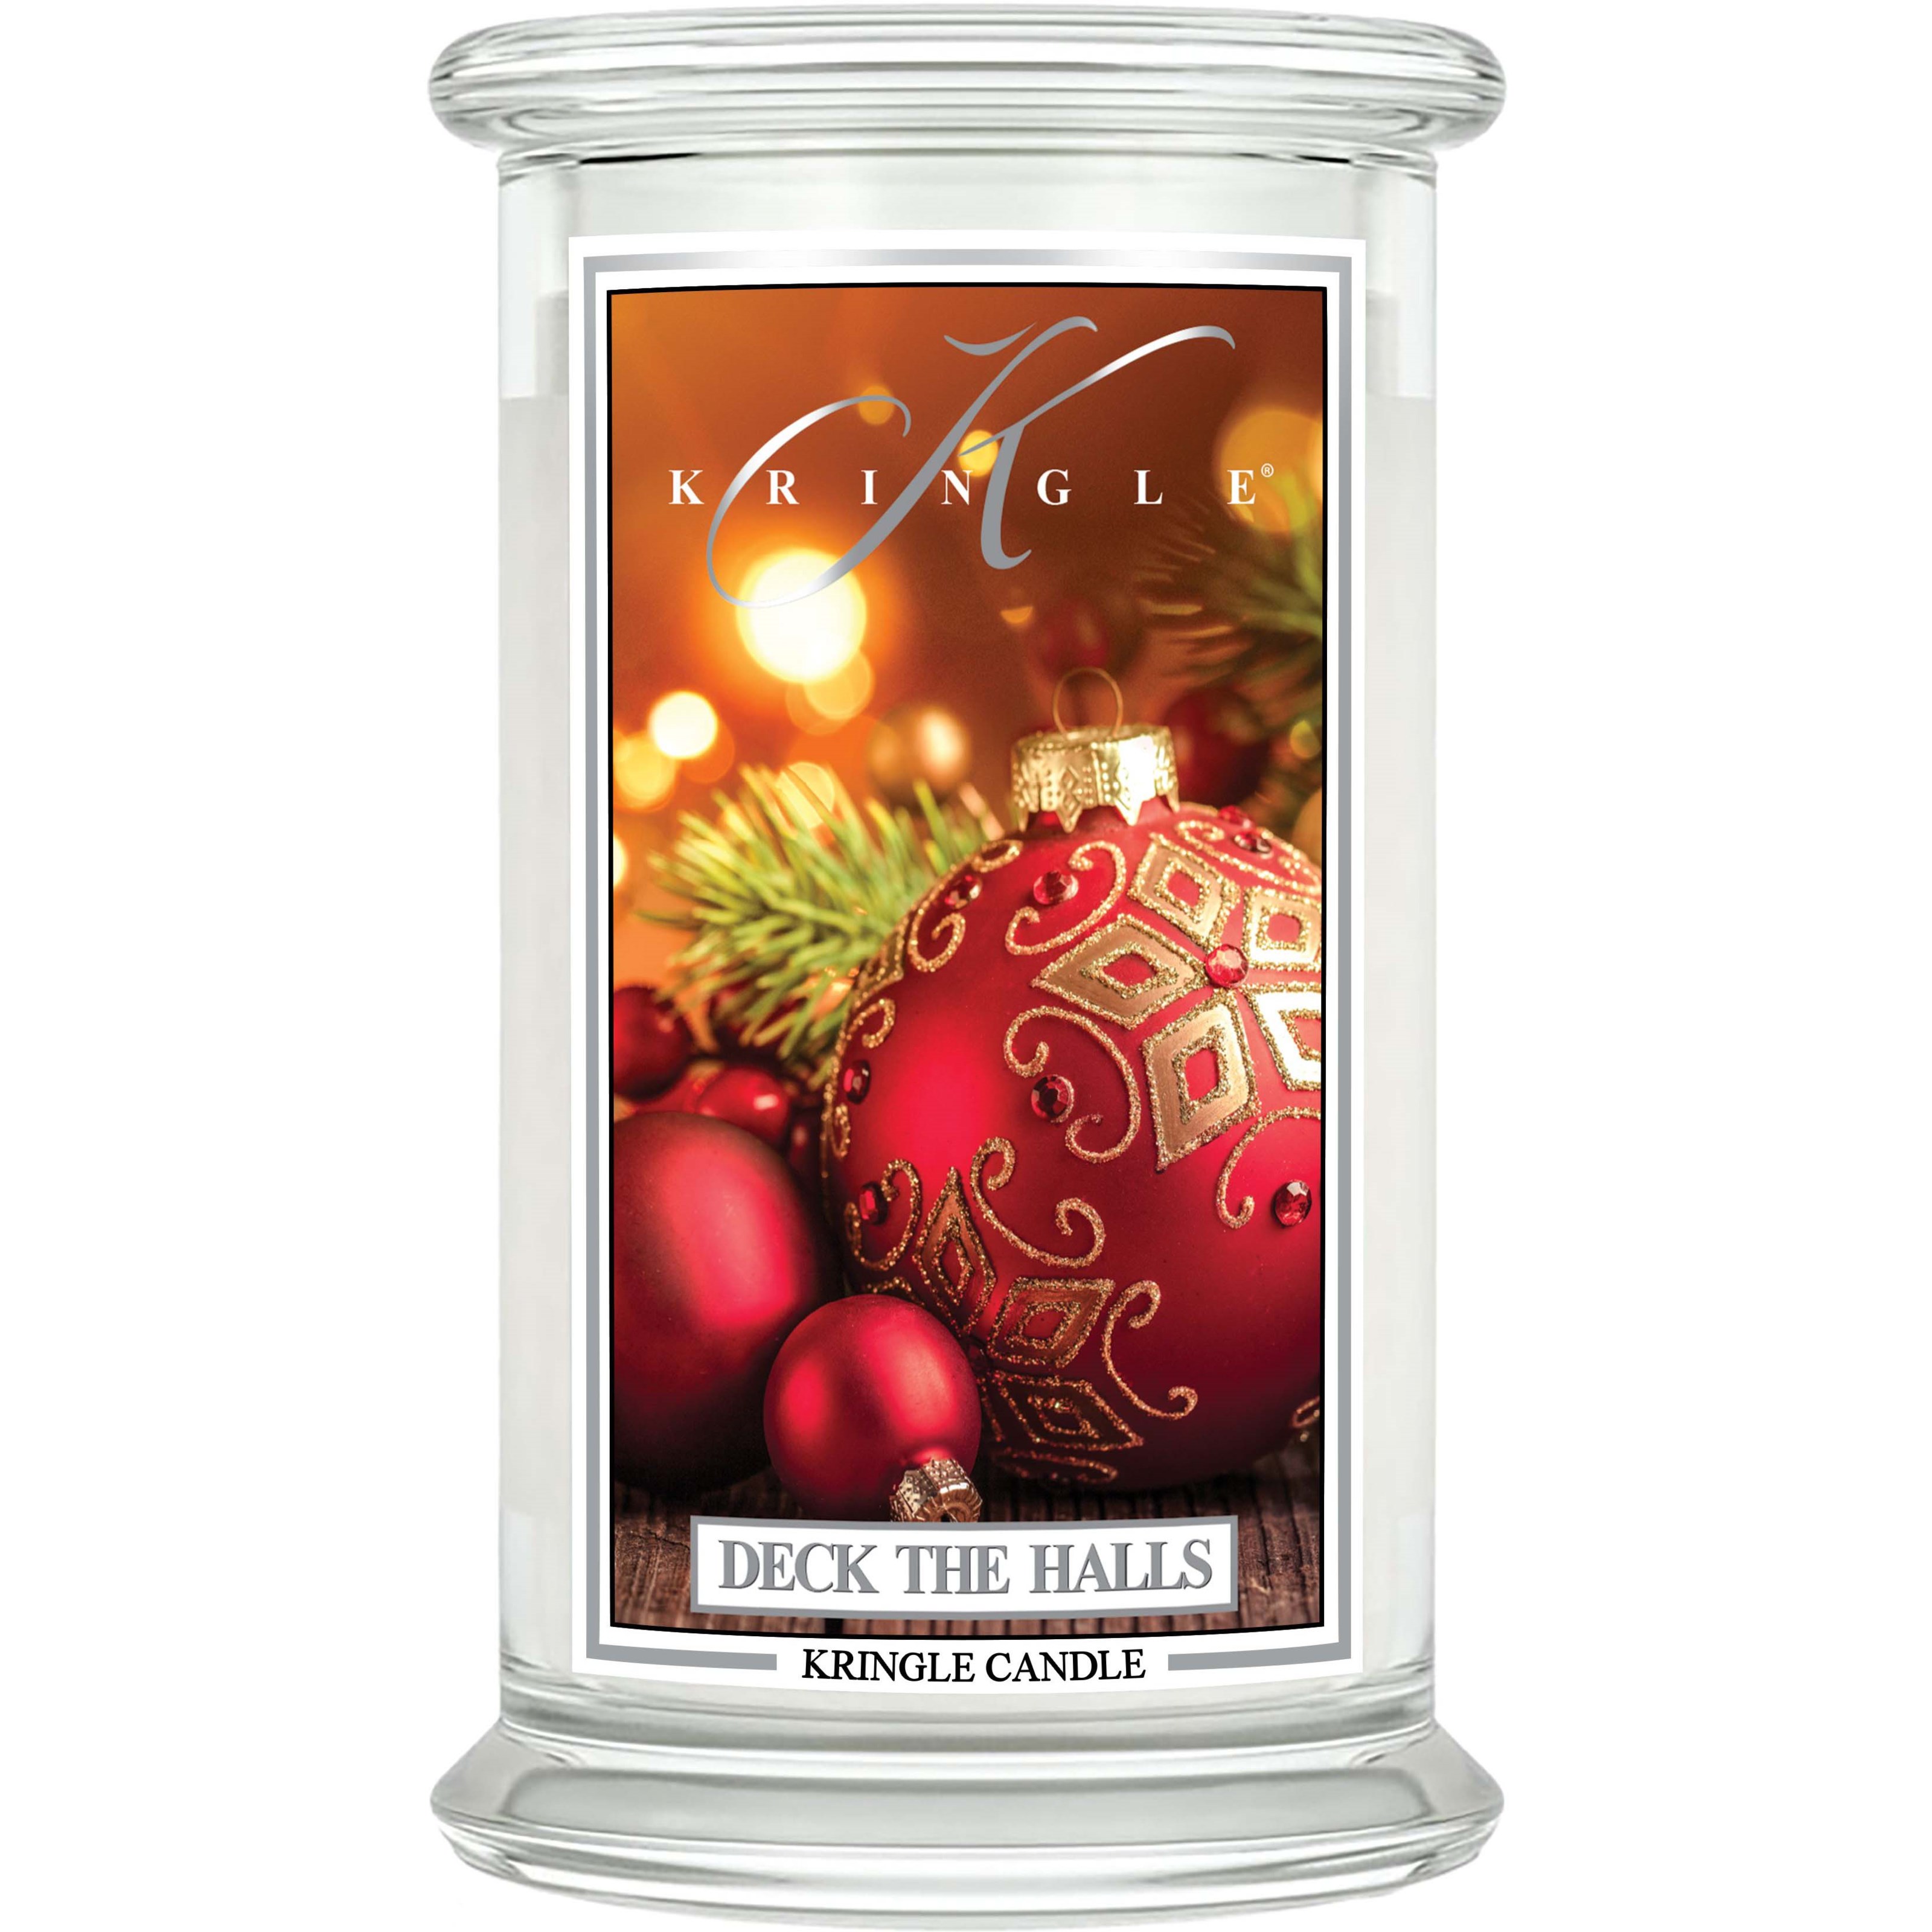 Kringle Candle Deck The Halls Scented Candle Large 624 g